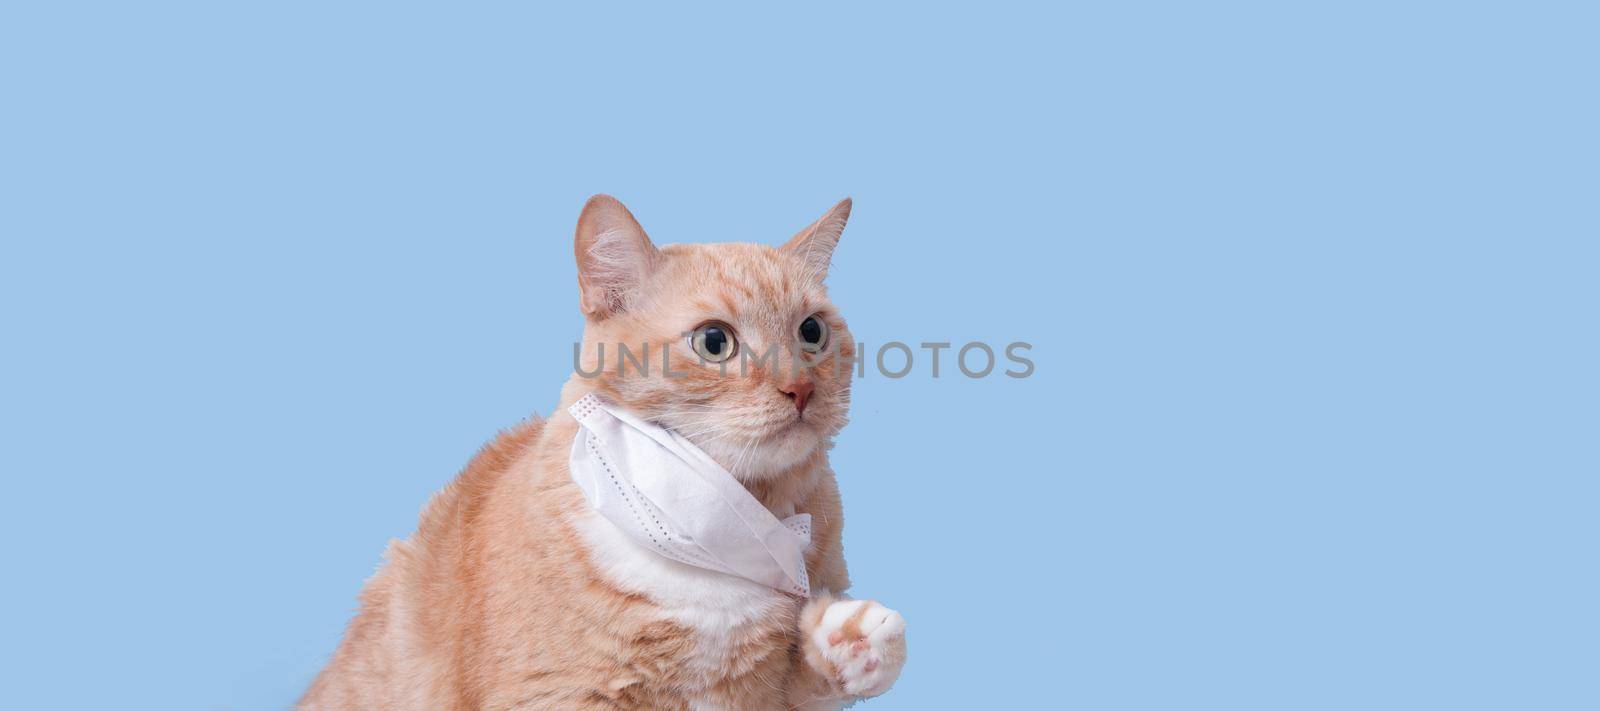 cute scared ginger cat in white children's medical protective mask on a blue background copy space, banner, veterinary and pet treatment